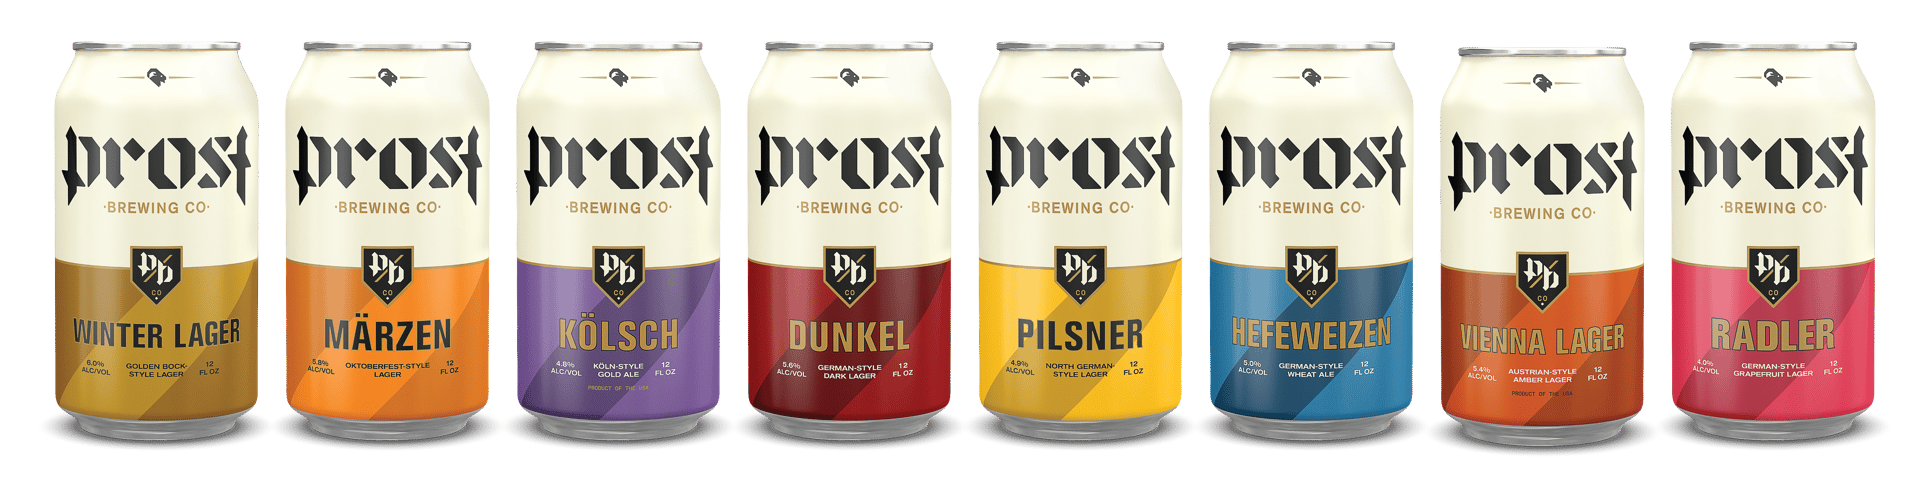 Our Biers - Colorado Brewing in Prost Company